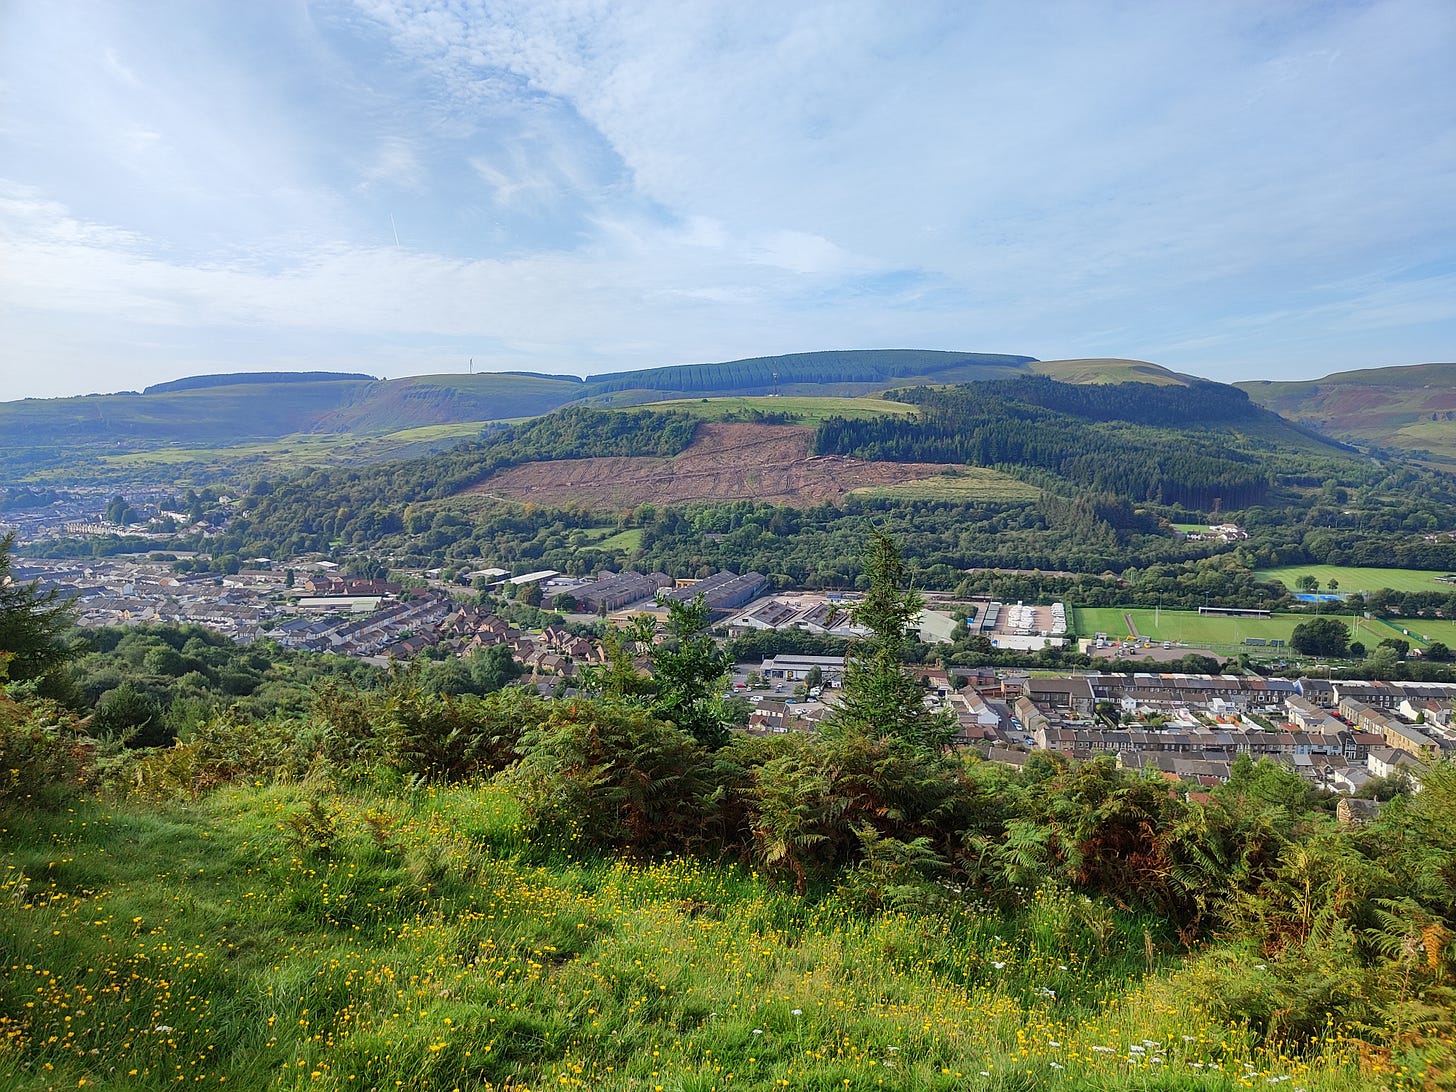 A view of the Rhondda from above treorchy. The hills are green, there are houses and other buildings in the valley, and the weather is sunny with hazy clouds above